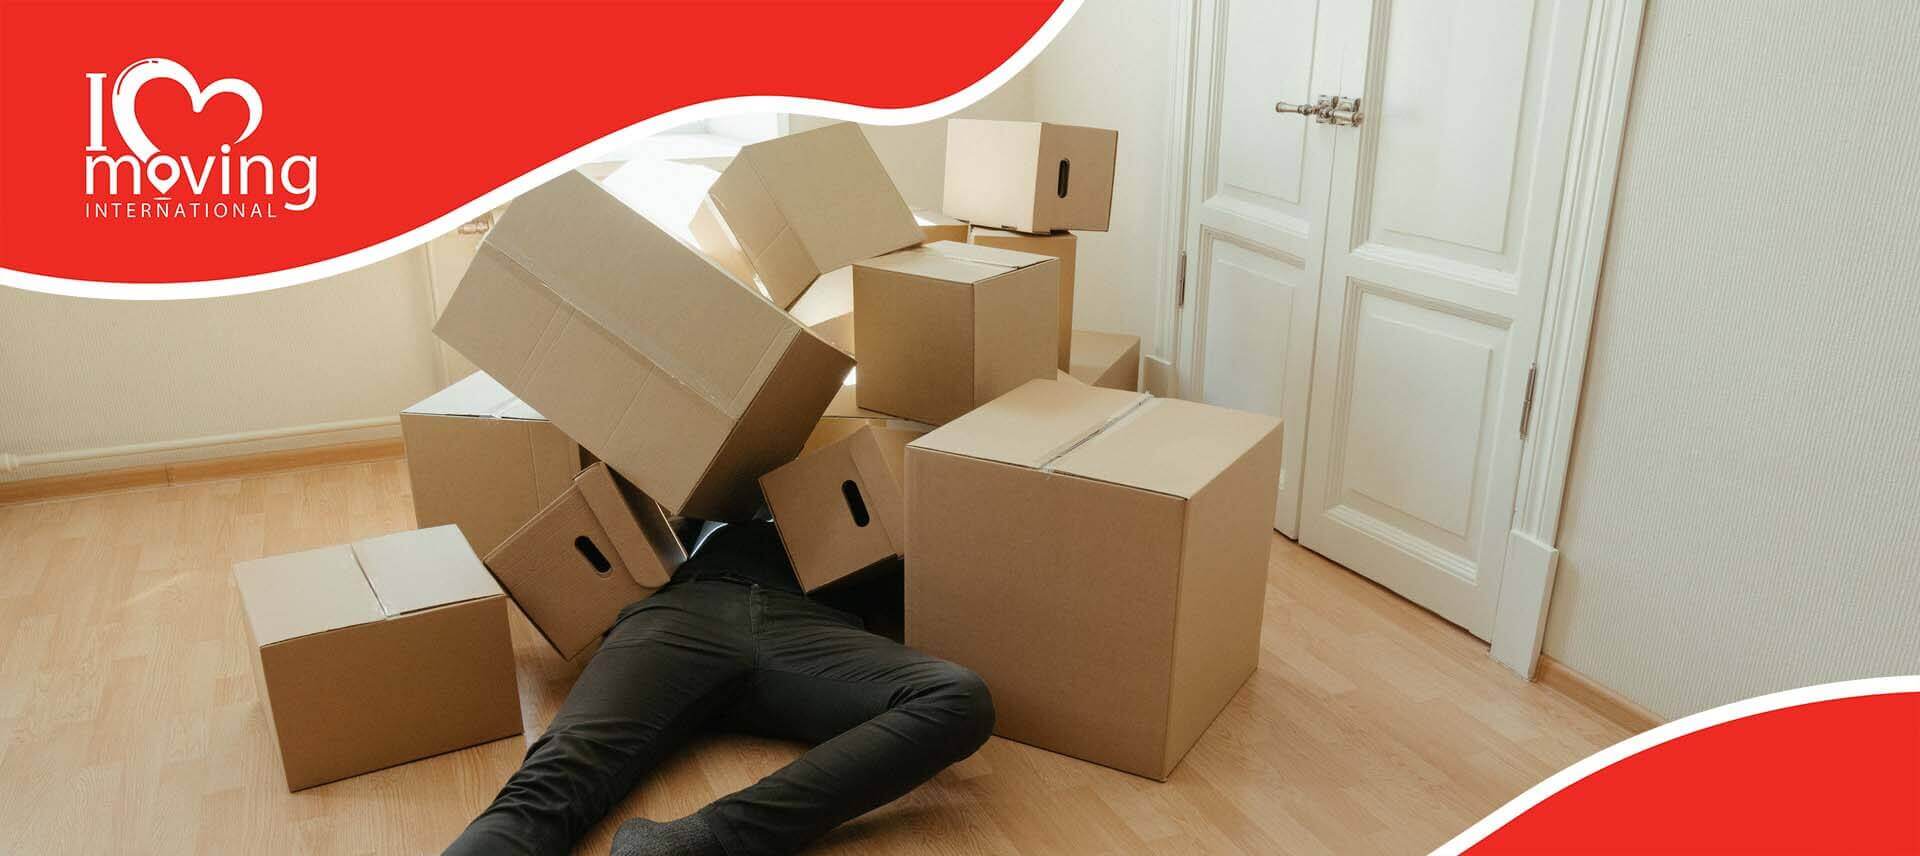 A man trapped under a pile of boxes while packing for long-distance moving